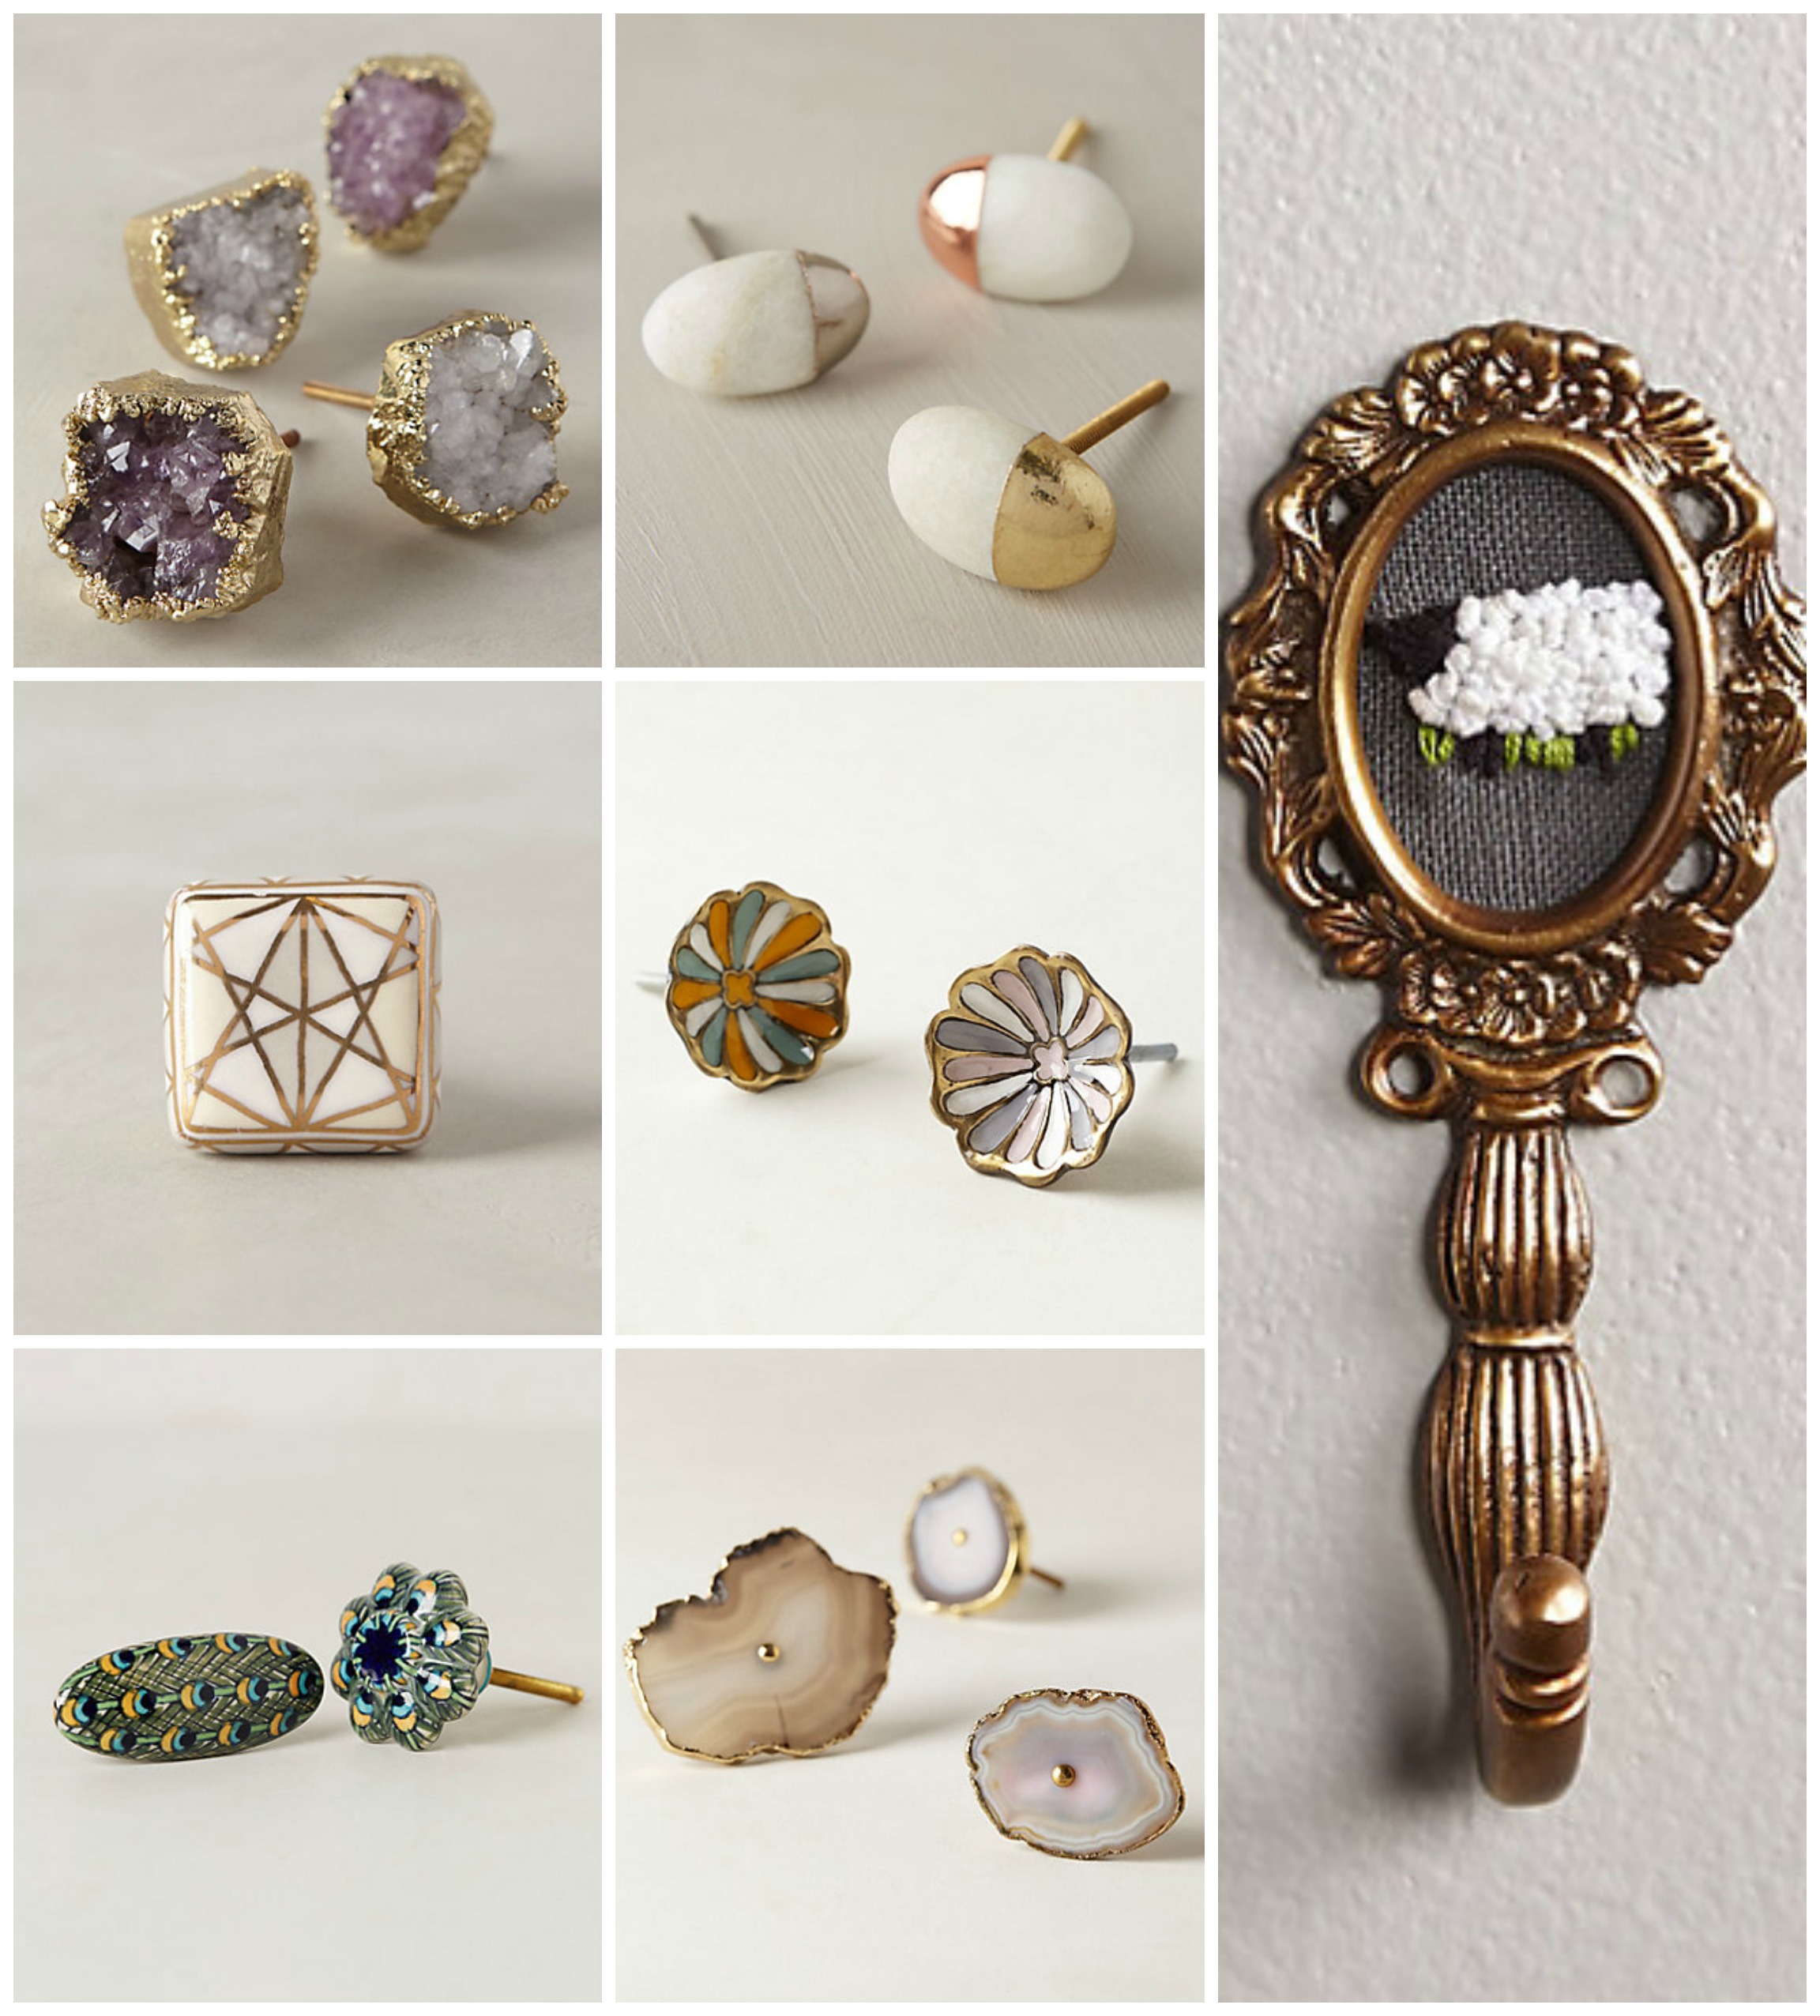 Anthropologie knobs and wall hooks